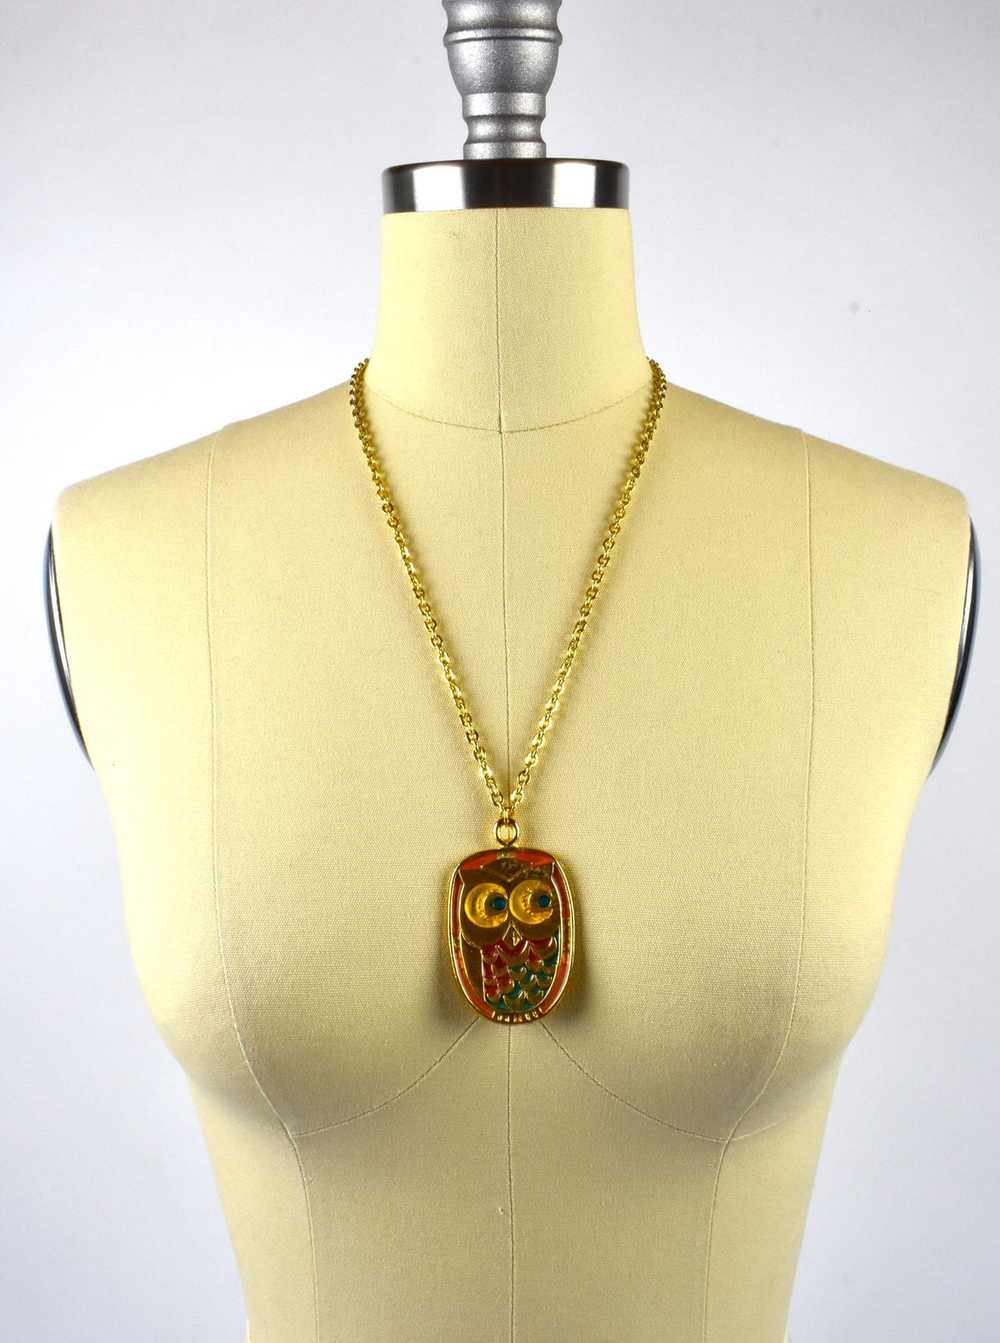 1970's Quirky Owl Pendant on Chain - image 1